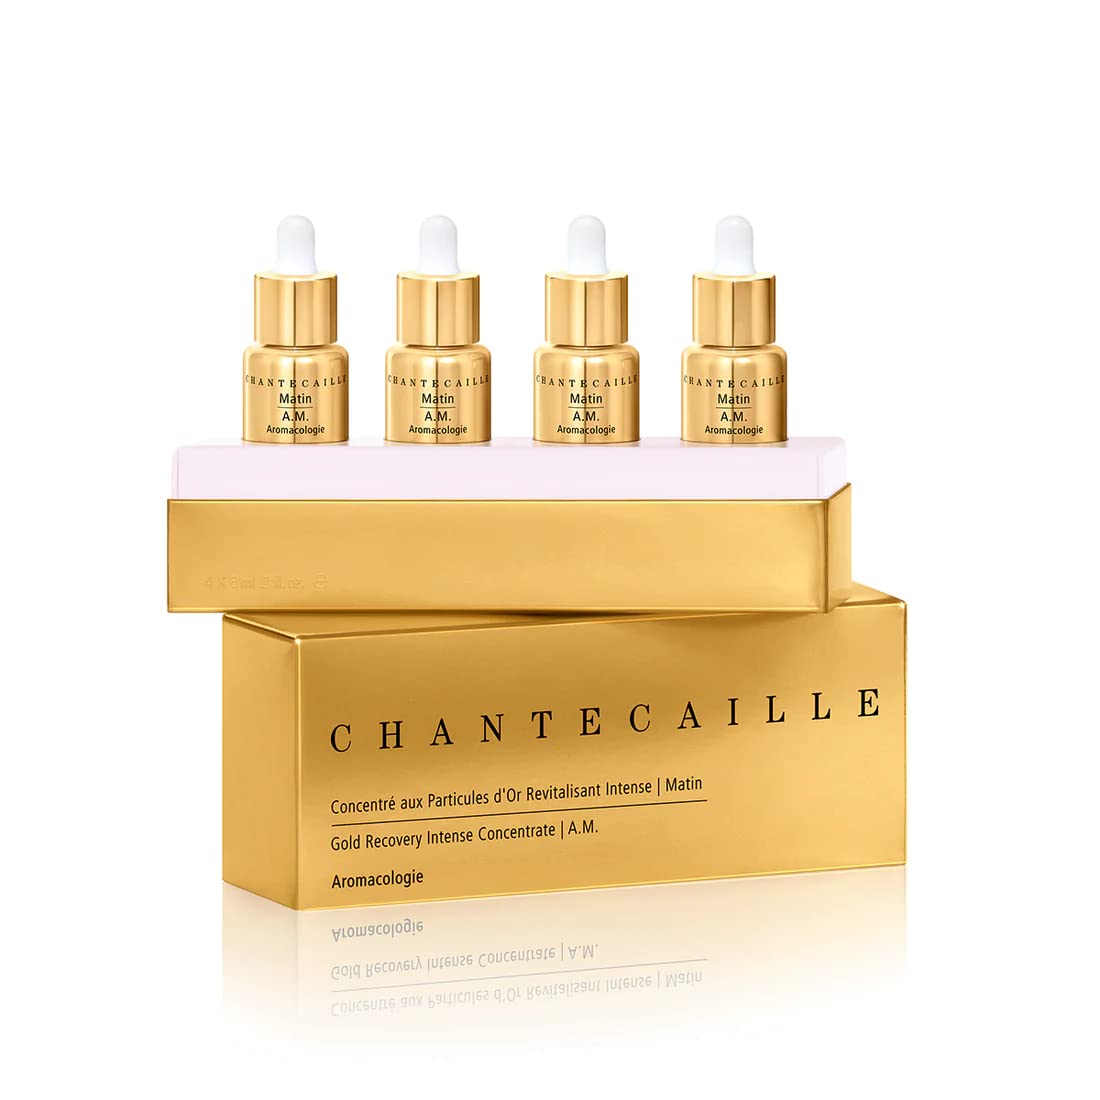 Chantecaille Gold Recovery Intense Concentrate A.M Serum 6ml x 4 Serum - 24ml